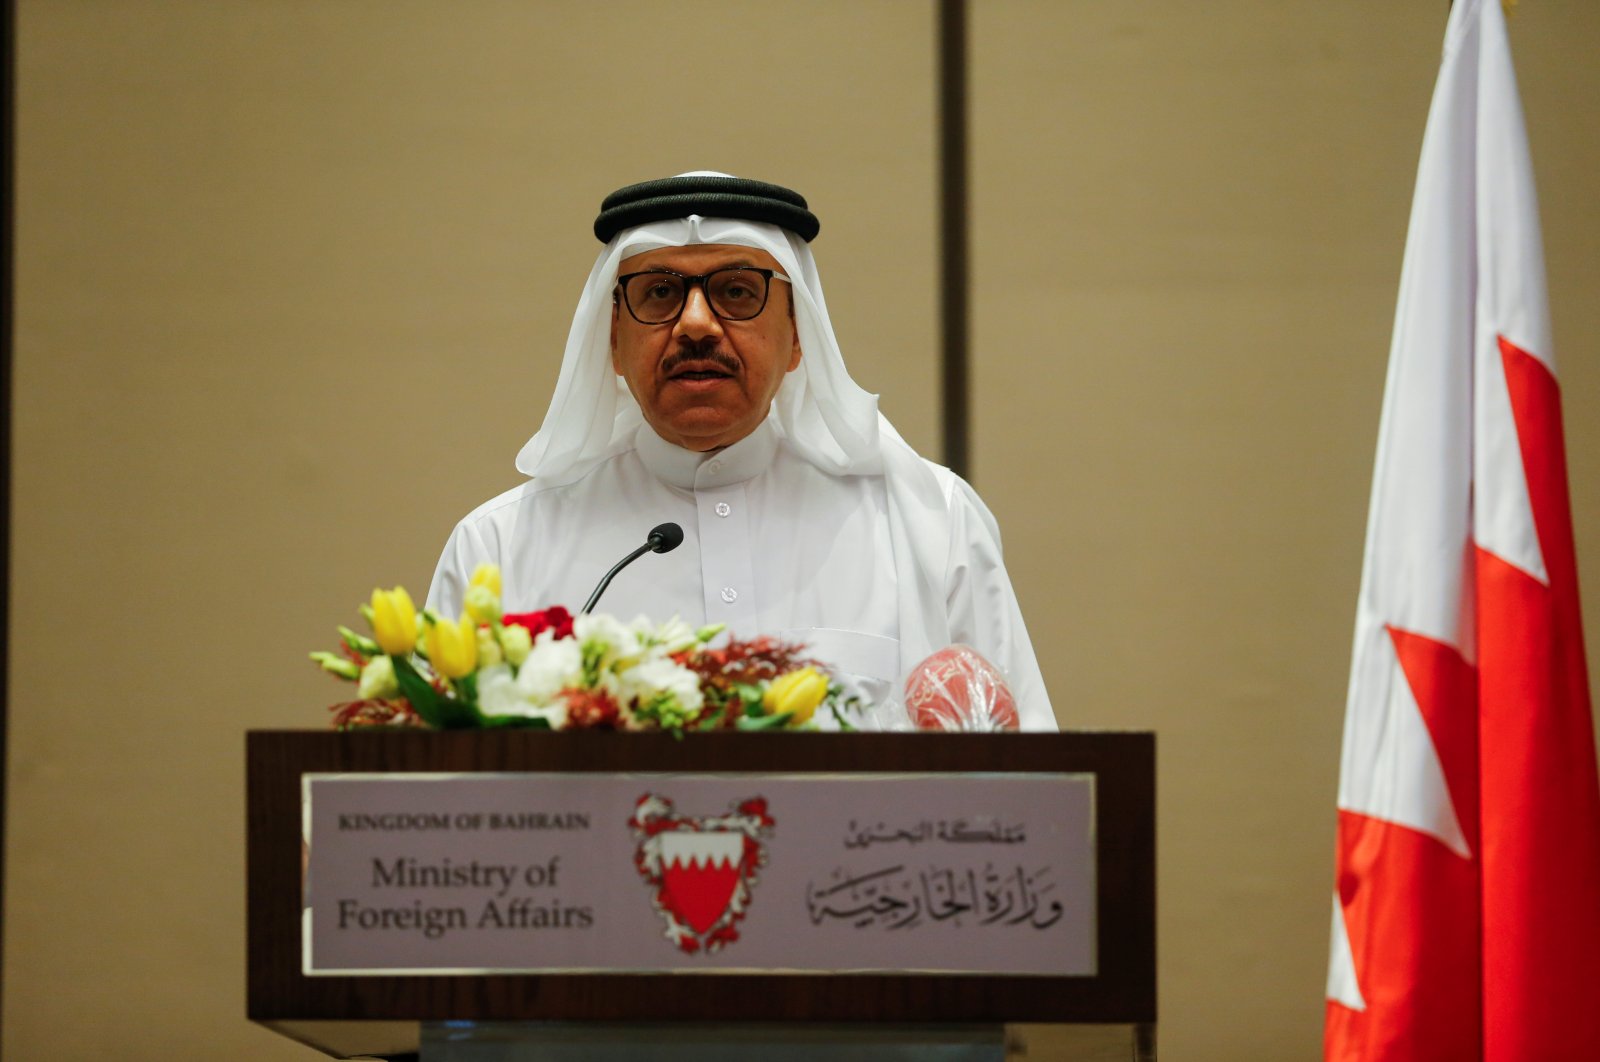 Bahrain Foreign Minister Abdullatif Bin Rashid Alzayani, speaks during a joint press conference with U.S. Special Representative for Iran Brian Hook, (not pictured), in Manama, Bahrain, June 29, 2020. (REUTERS Photo)